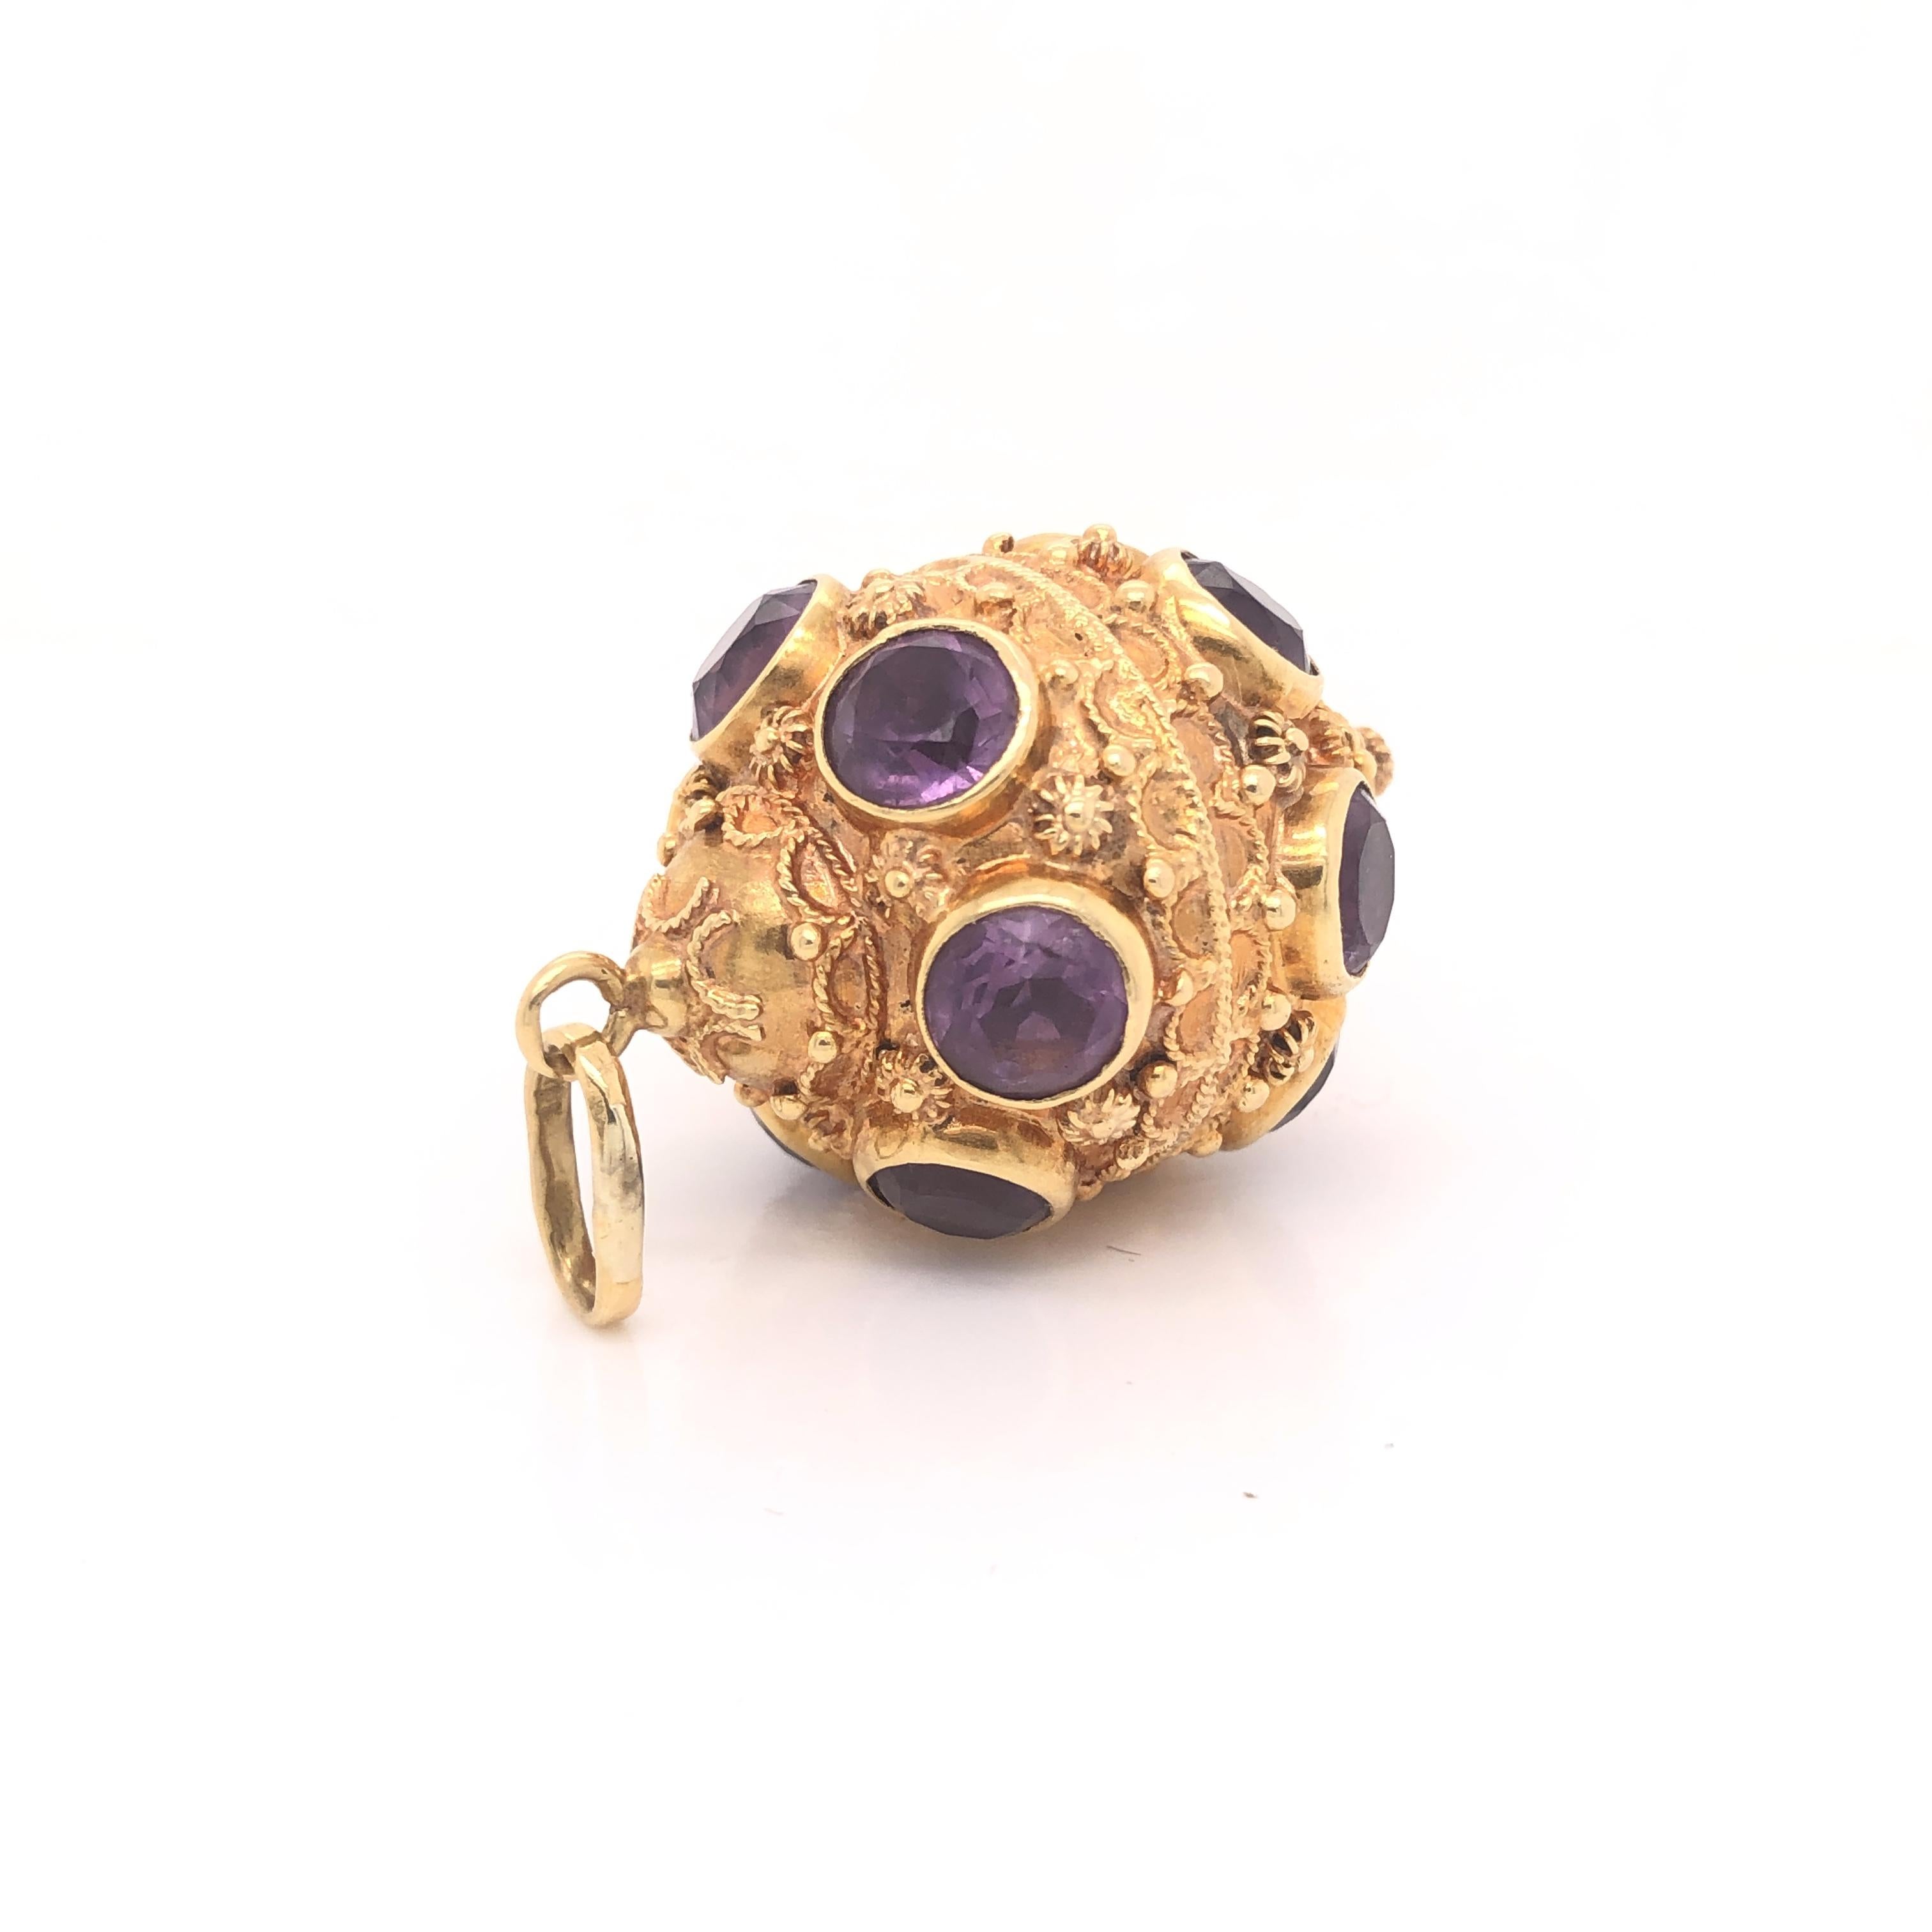 Amazing detail on this vintage treasure. The charm is crafted in 18k yellow gold with details seen throughout. The charm shows Etruscan period details and is set with Amethyst gemstones throughout. Each Amethyst gemstone weighs approximately .75 -